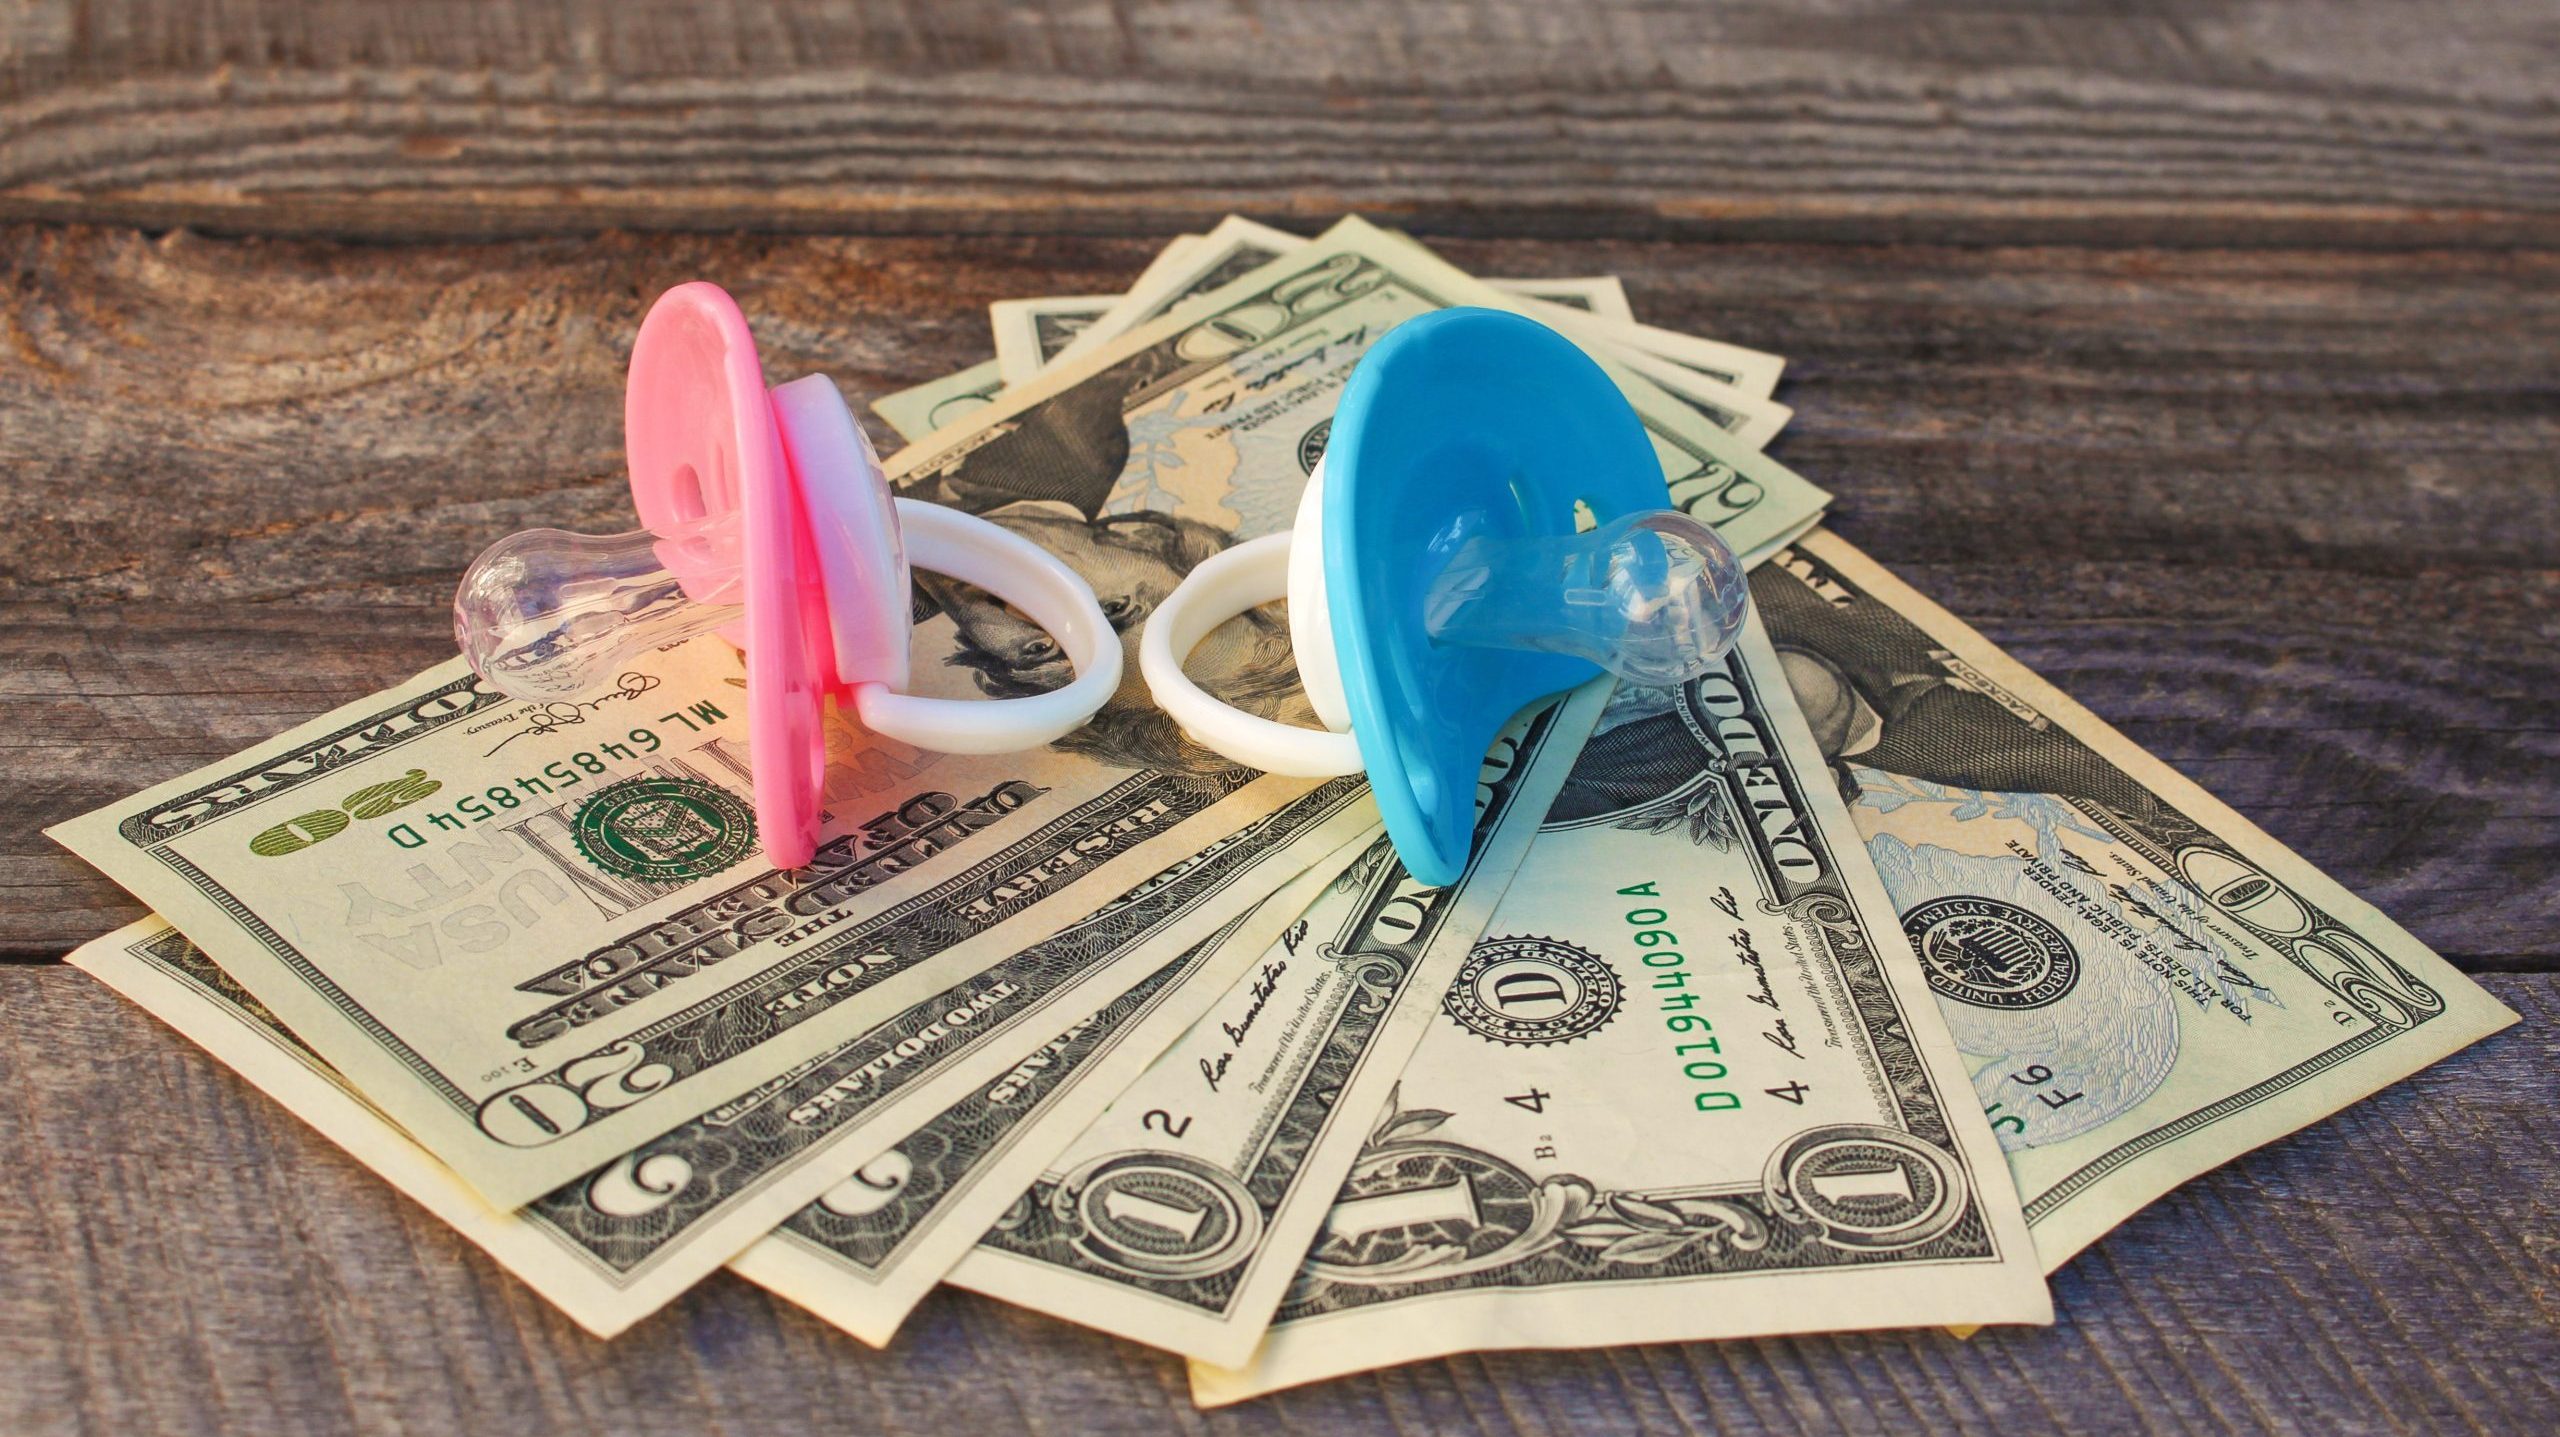 Blue and pink pacifiers on the background of money.